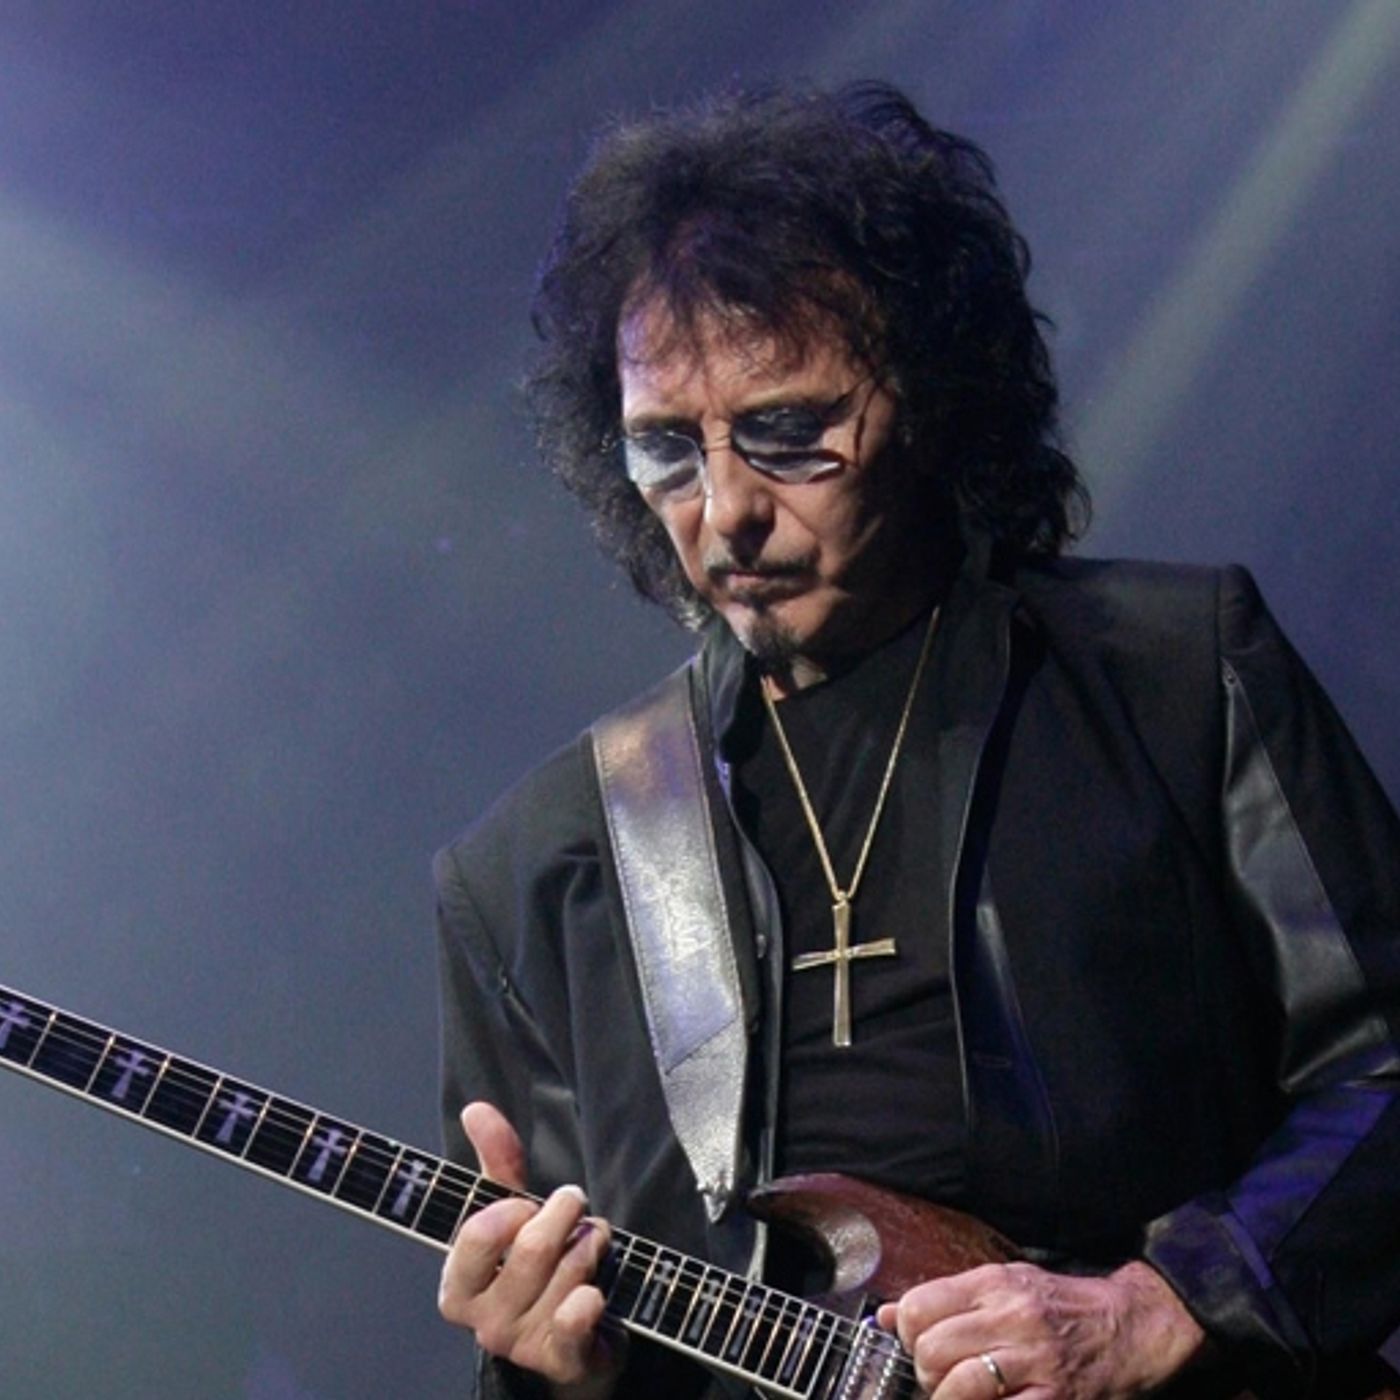 Tony Iommi reveals the lump in his throat wasn’t cancerous and talks about writing music for Birmingham Cathedral